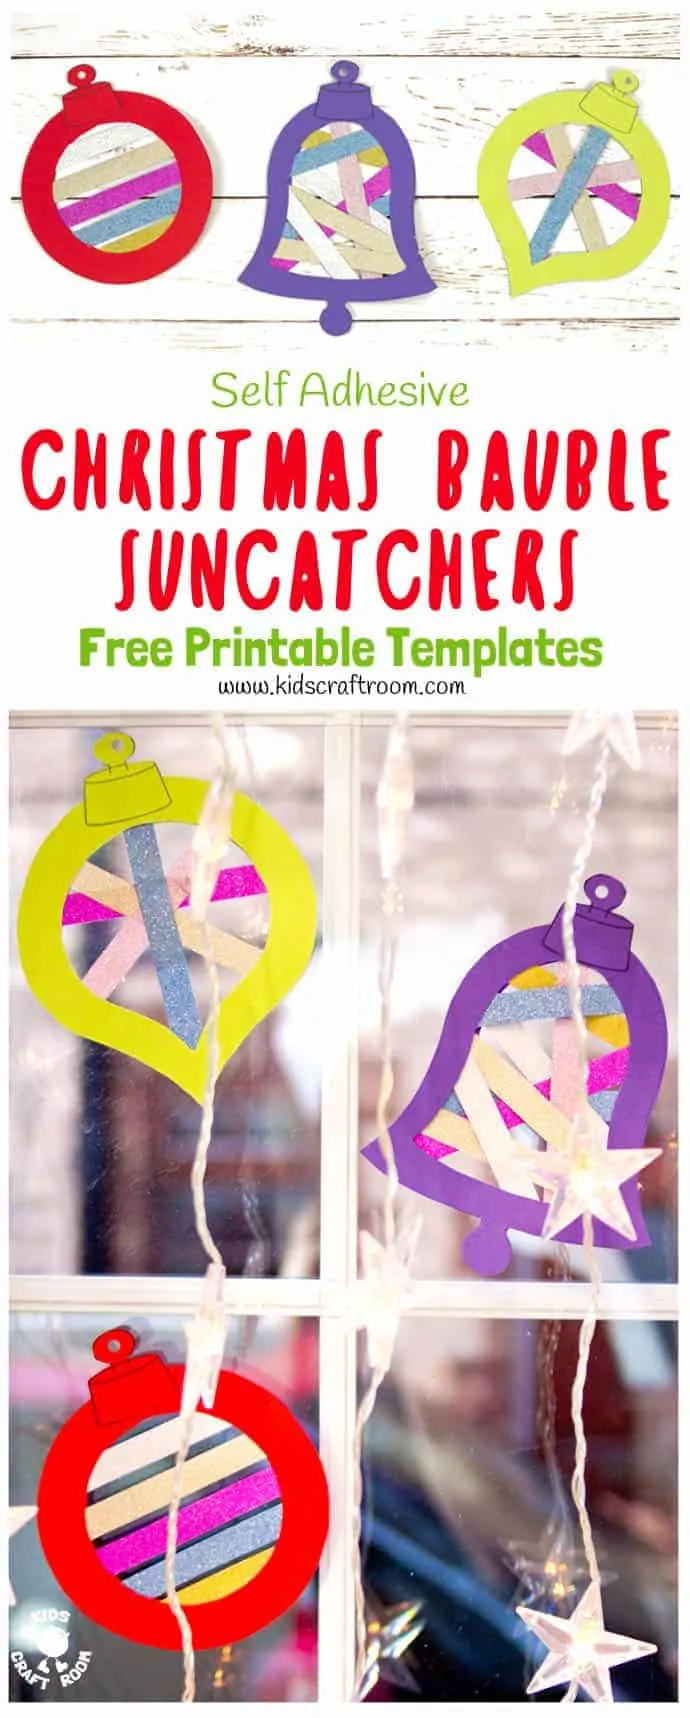 Christmas Bauble Suncatchers are a fun way to make your windows look colourful and festive. These pretty Christmas suncatchers are easy to make with 3 free printable frames to choose from. A colourful Christmas ornaments craft for kids of all ages. #suncatcher #christmas #baubles #christmascrafts #kidscrafts #kidscraftroom #papercrafts #washitape #ornaments #freeprintable #printable